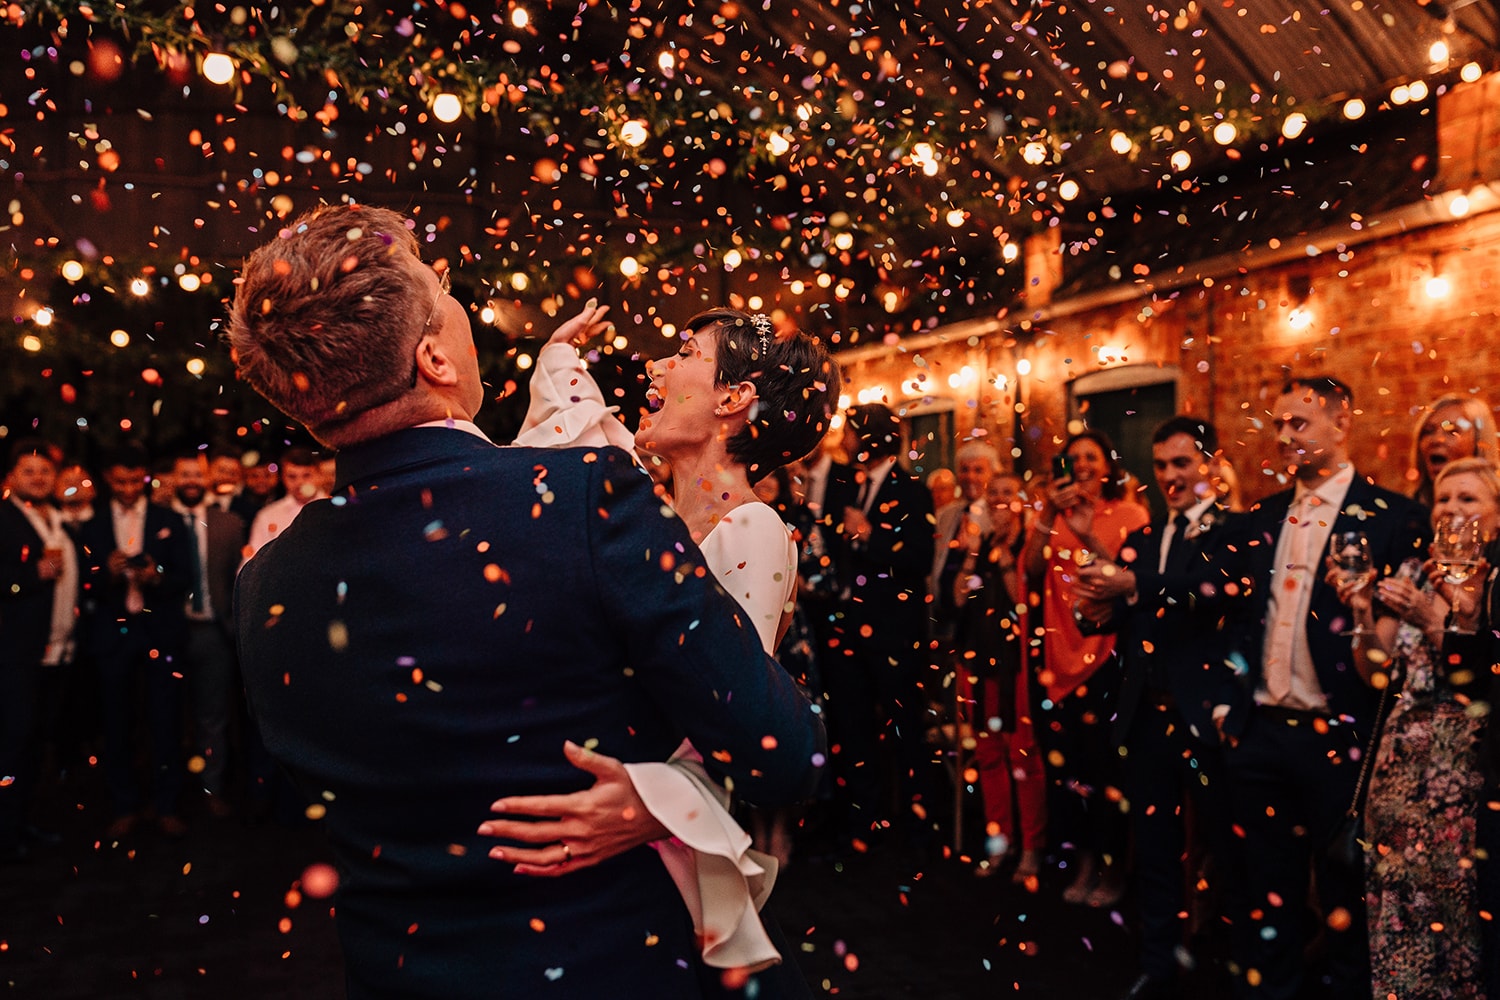 Confetti canons being used during the wedding first dance